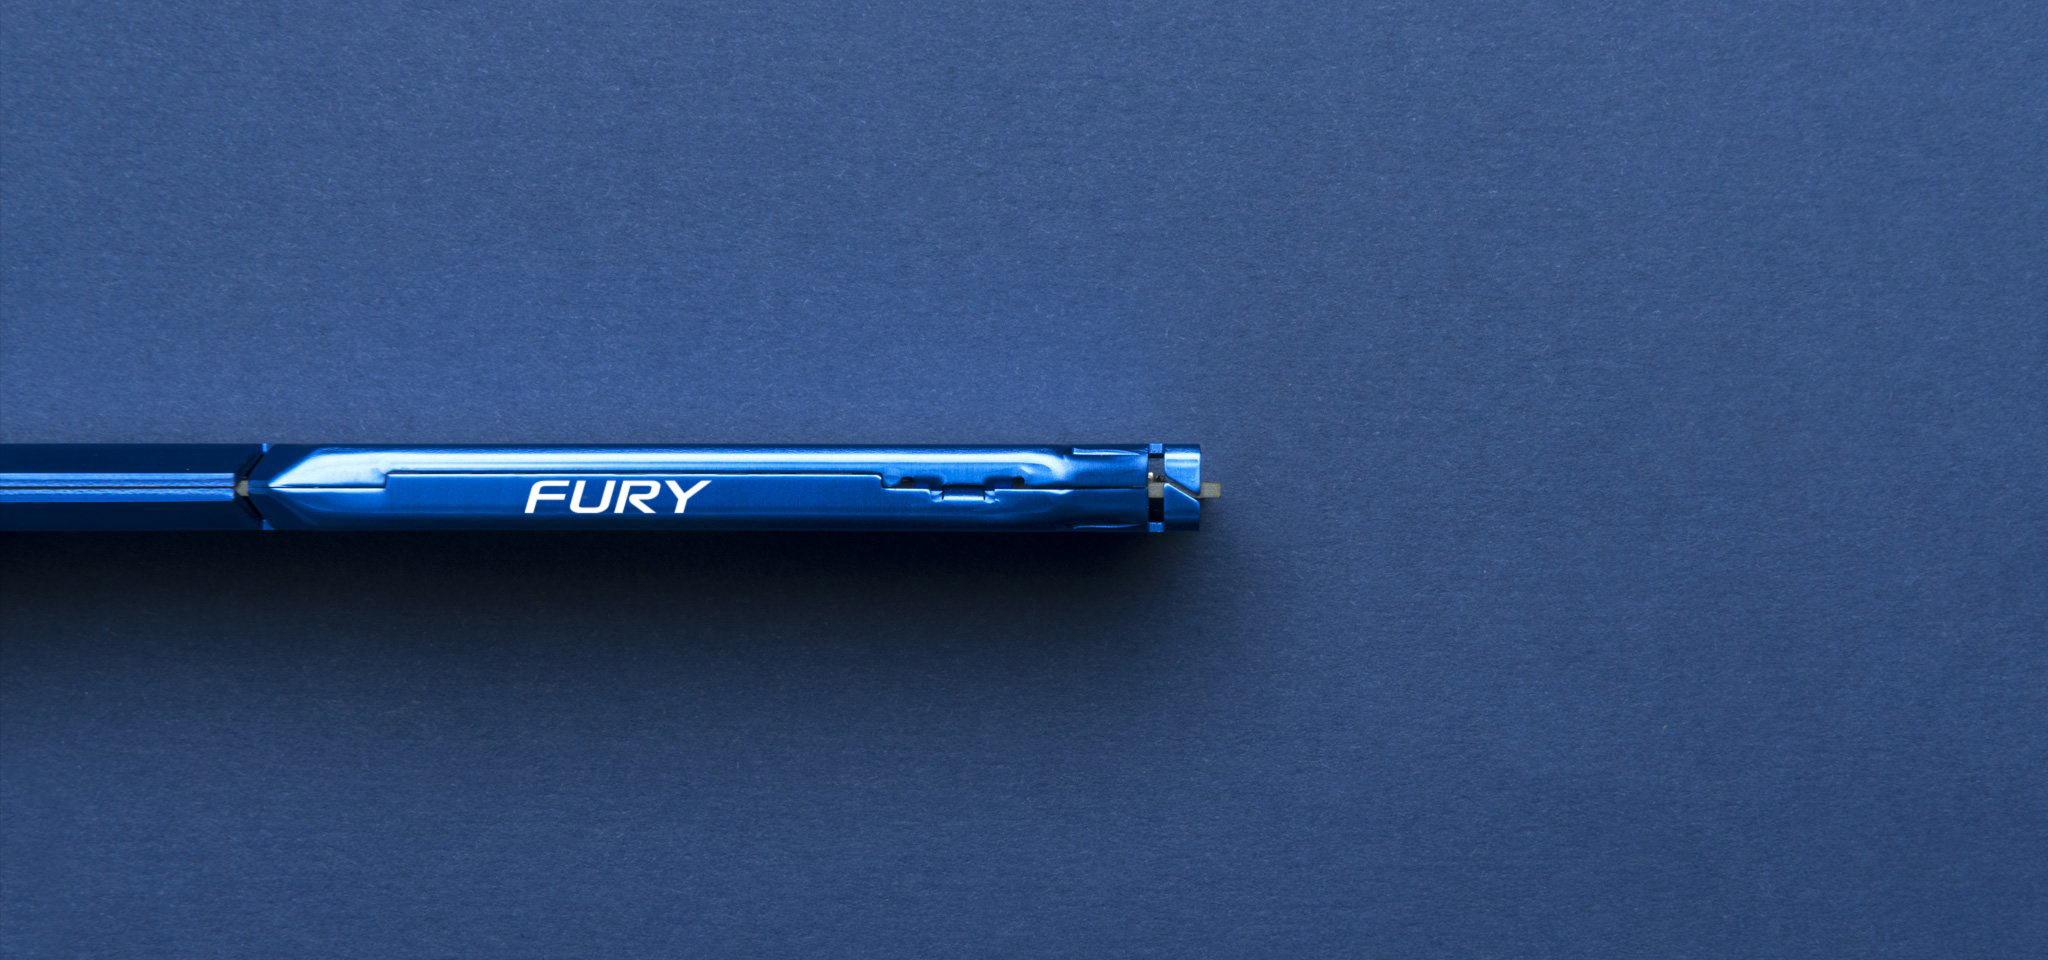 The top edge of a blue Kingston FURY Beast DDR3 memory module sits against a solid blue surface